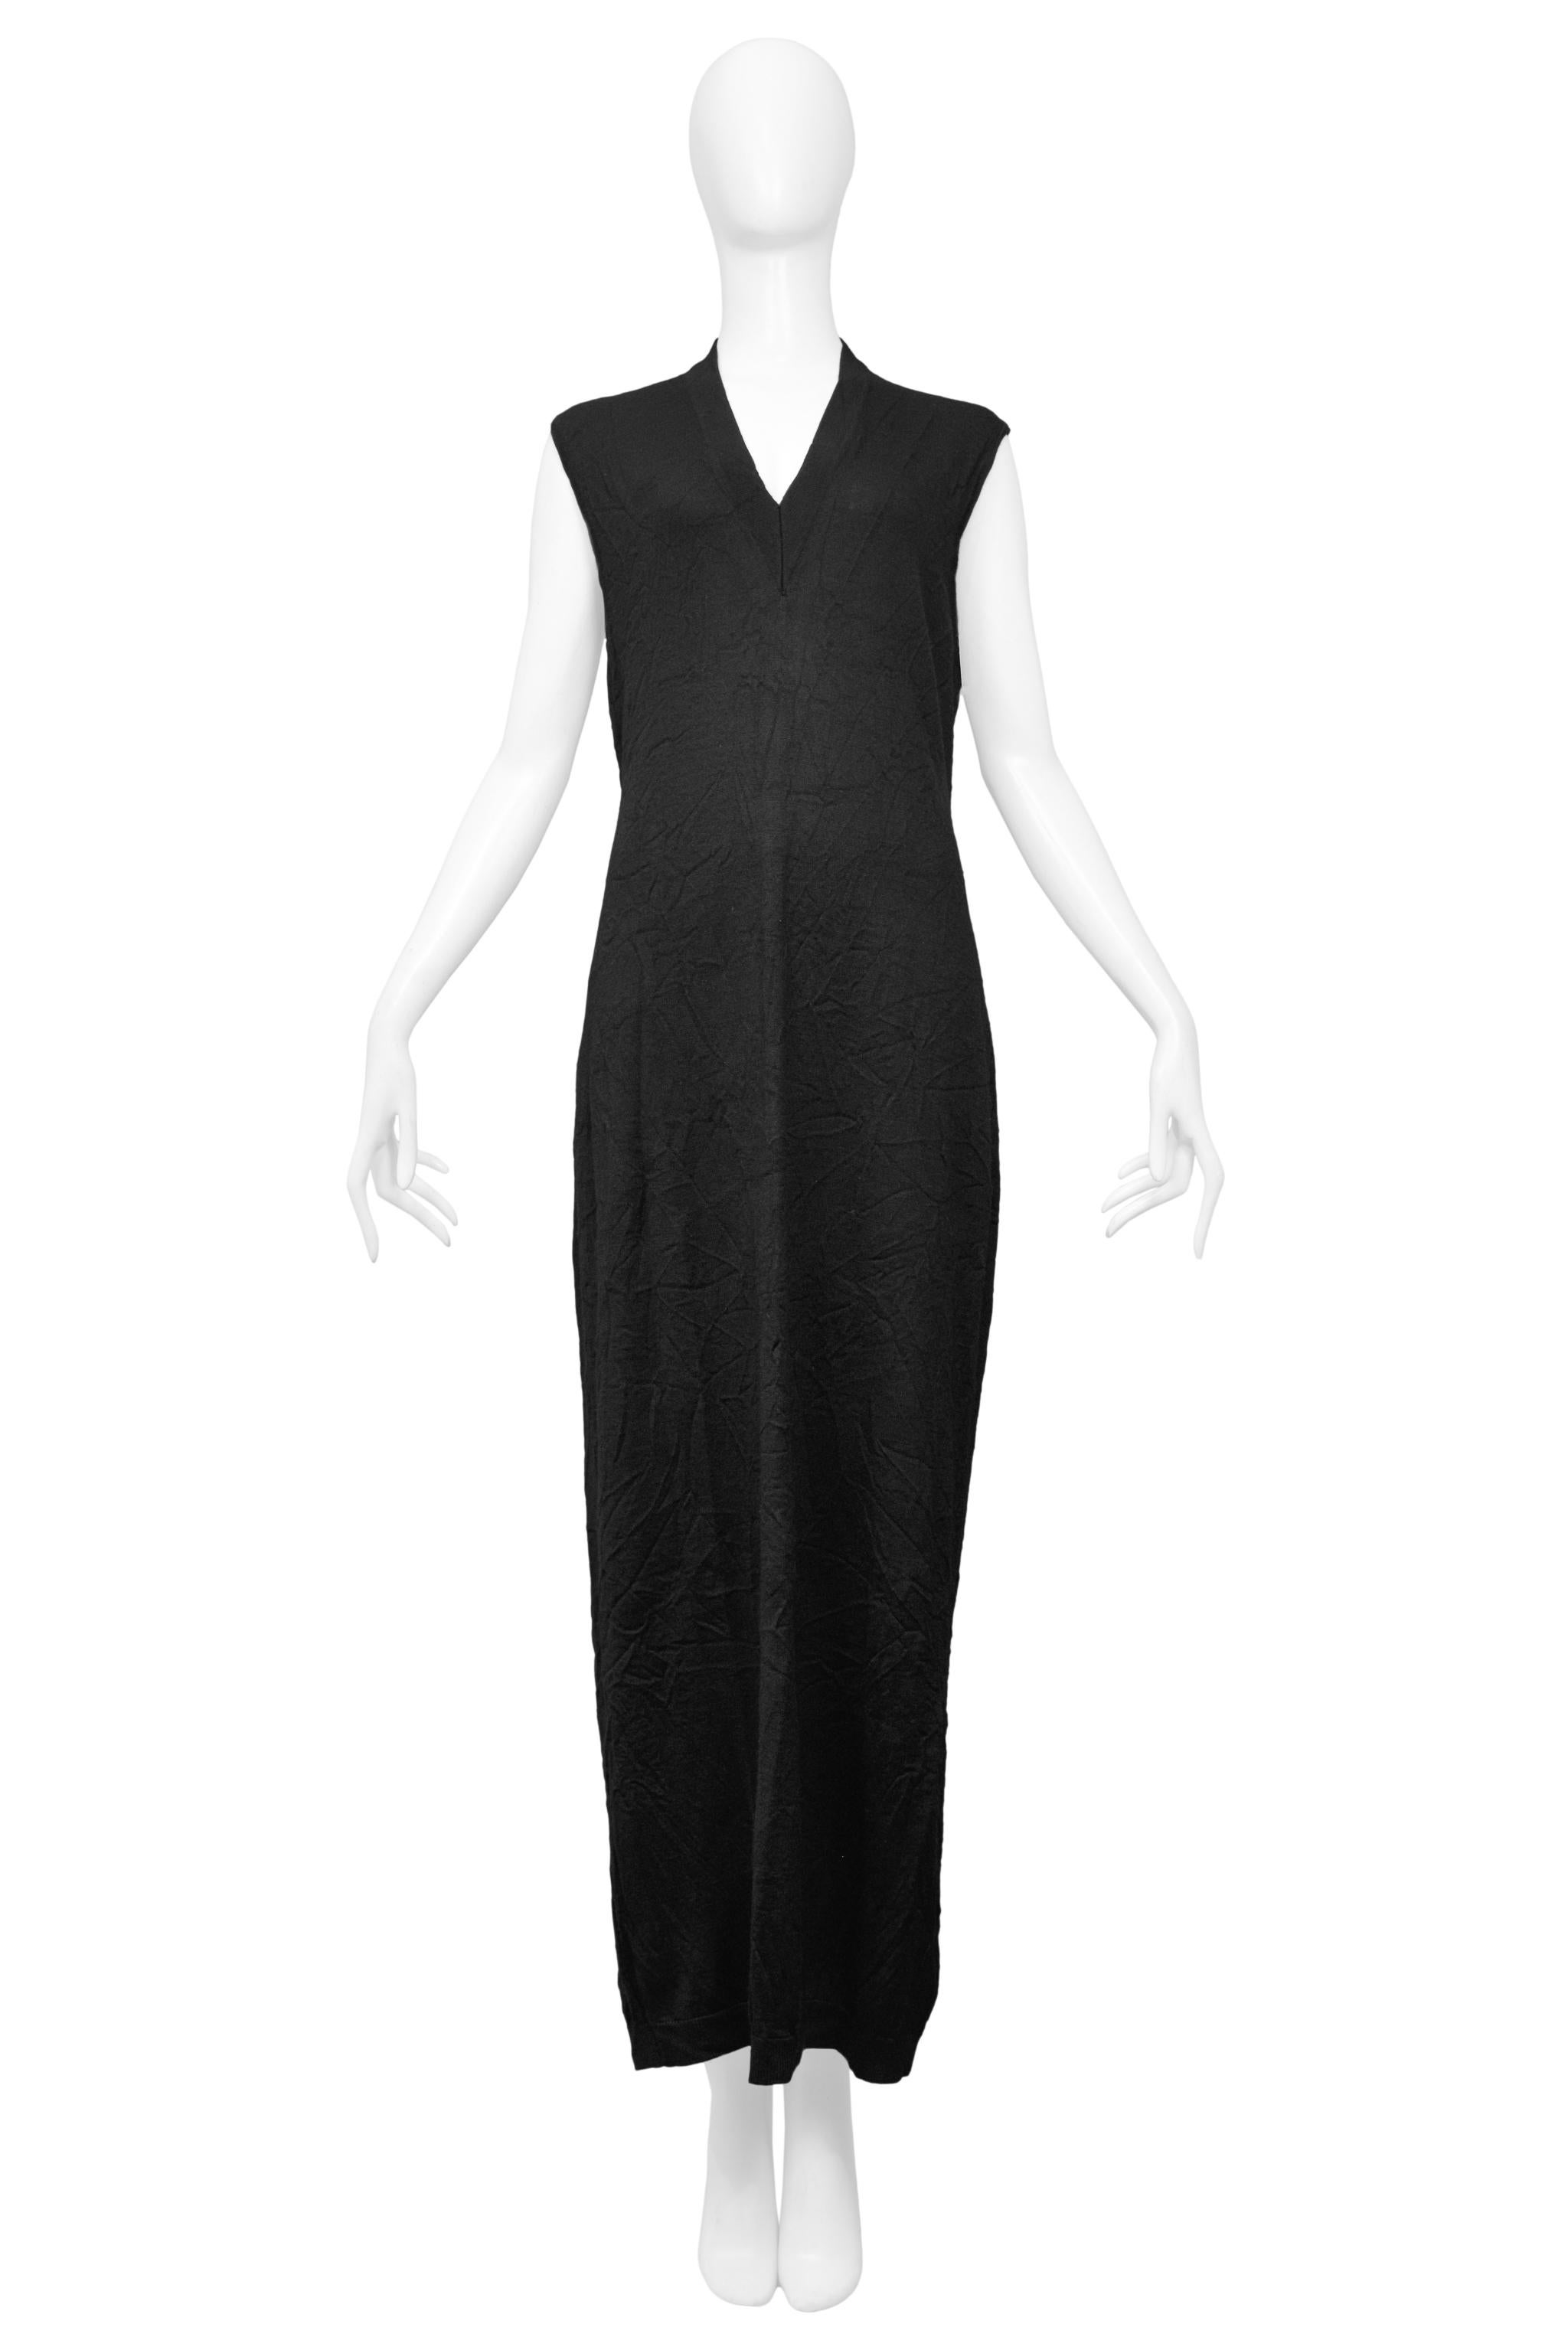 Resurrection Vintage is excited to offer a vintage Maison Martin Margiela black sleeveless maxi sweater dress featuring a v-neckline and crinkle appearance.

Maison Martin Margiela
Size: Medium 
Excellent Vintage Condition
Authenticity Guaranteed
